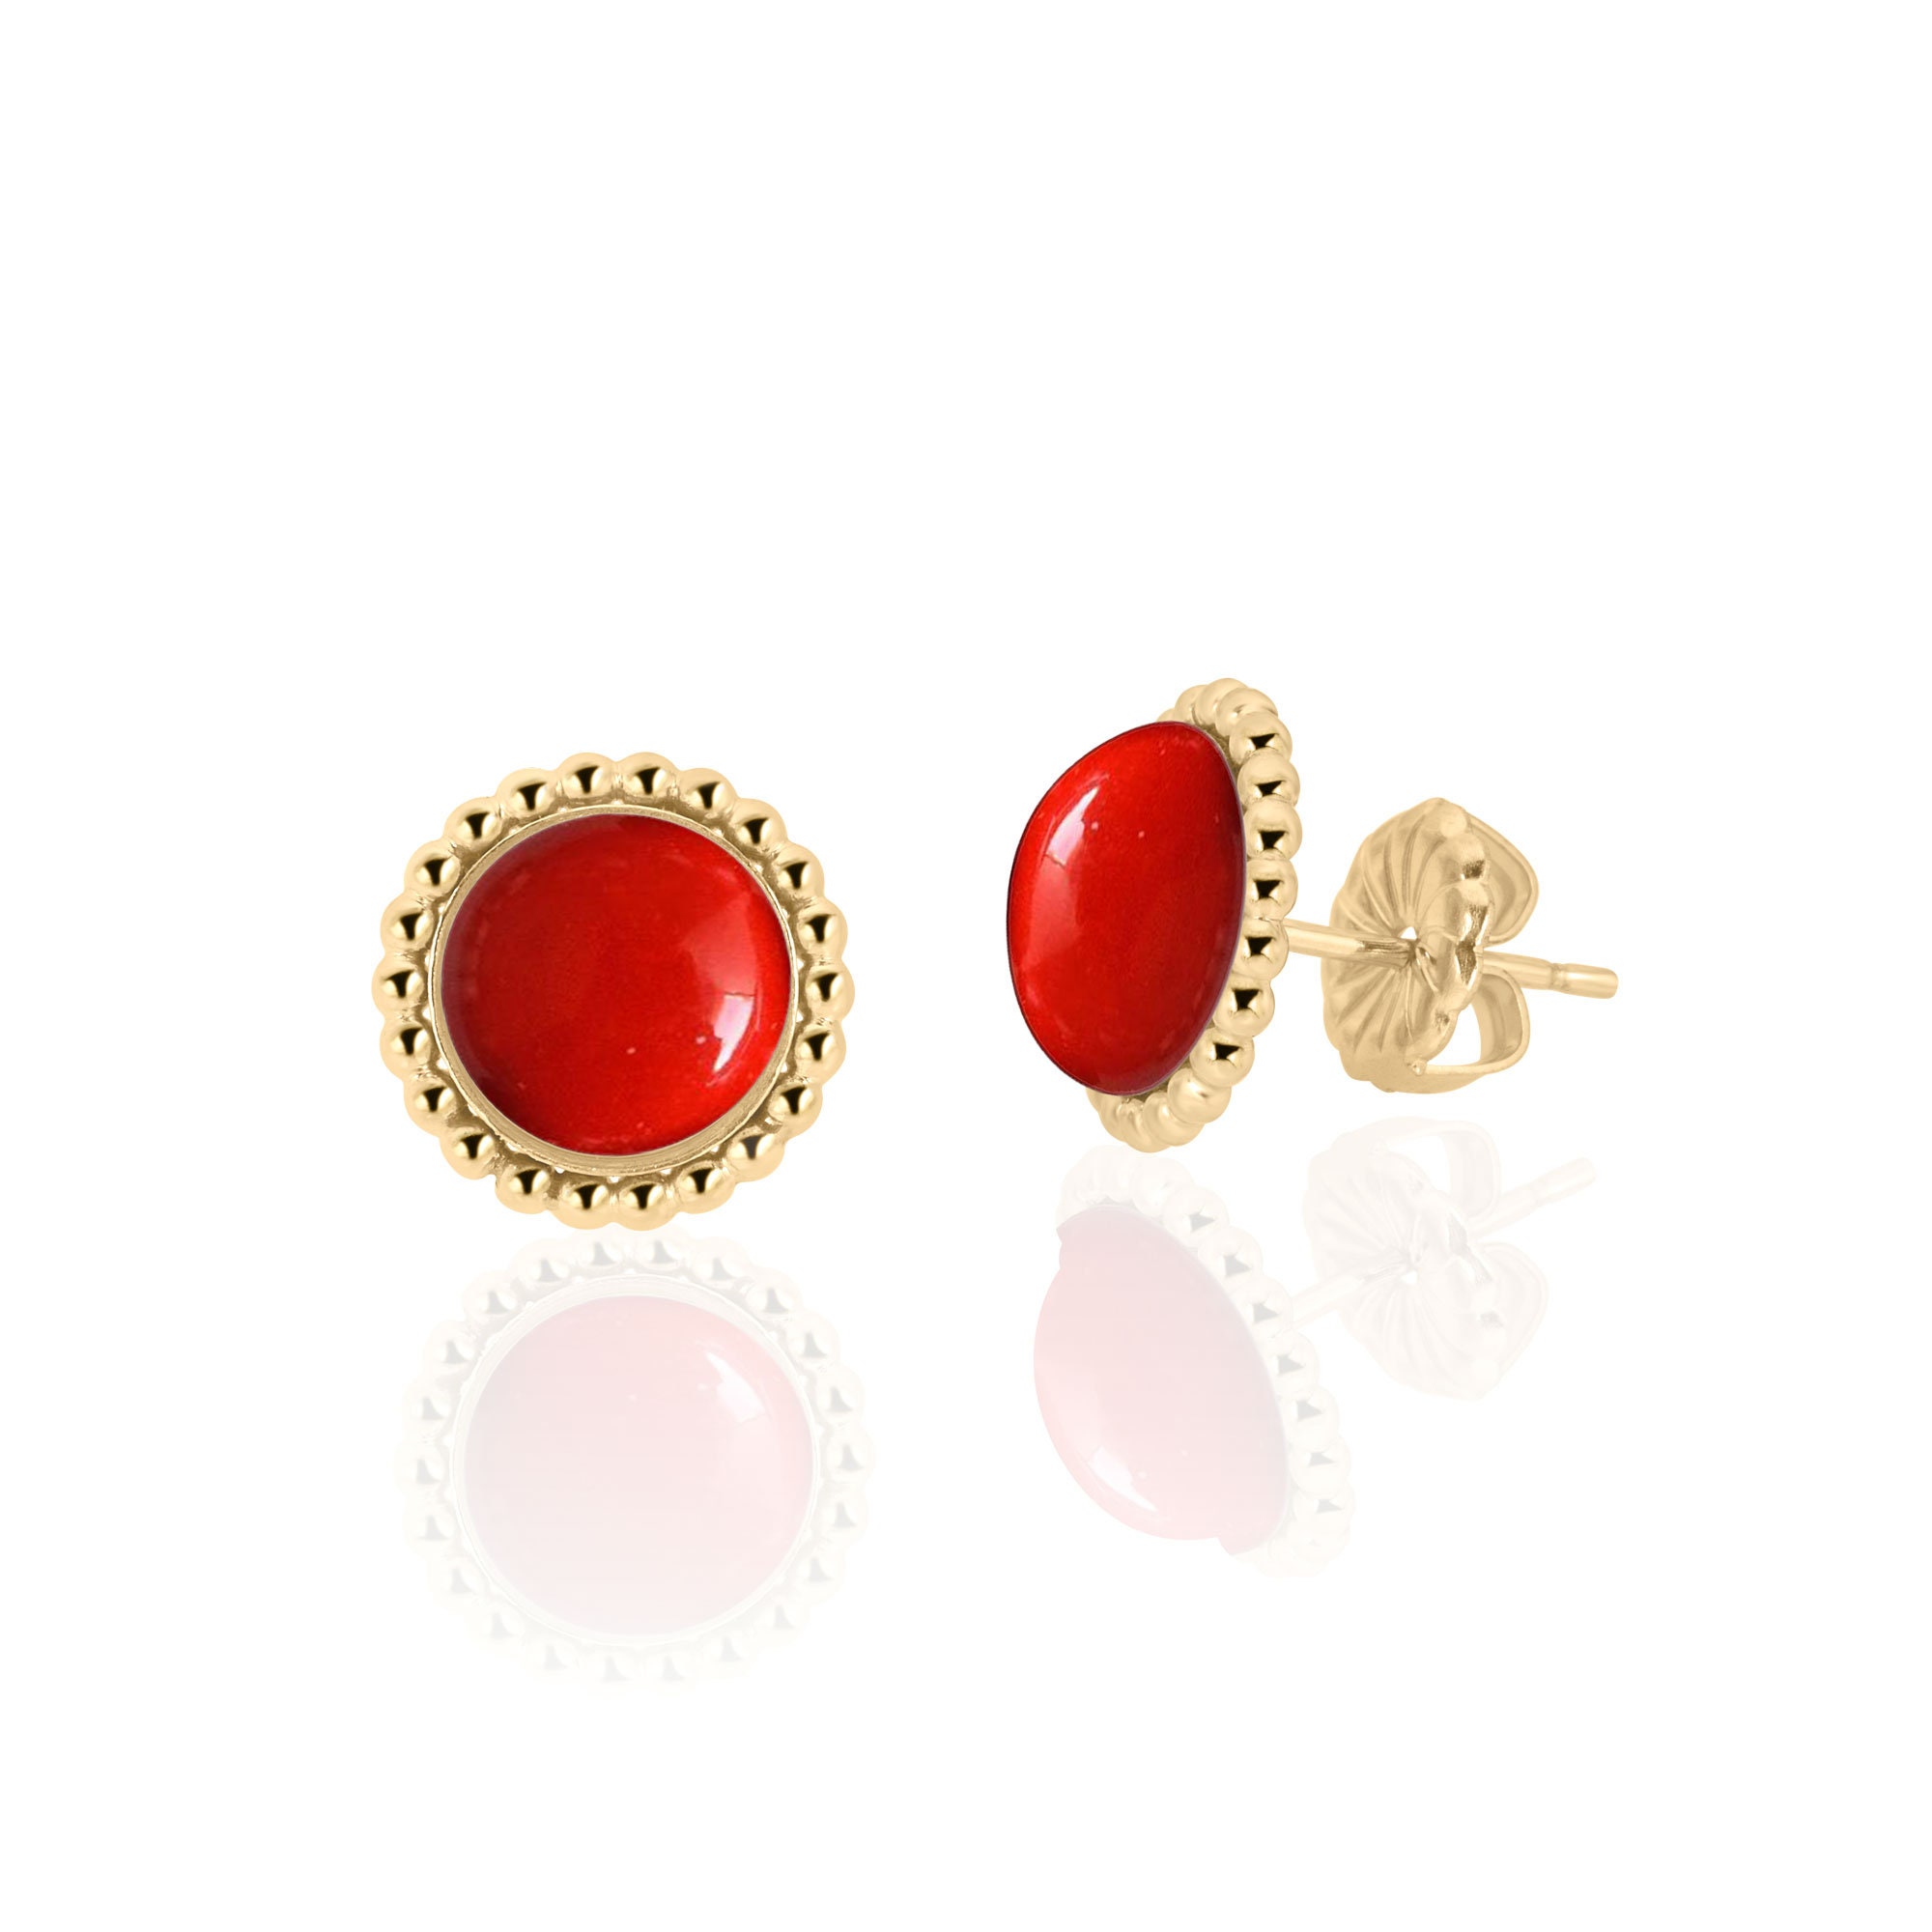 Red Coral Earrings Studs in 14K Gold Filled Red Coral